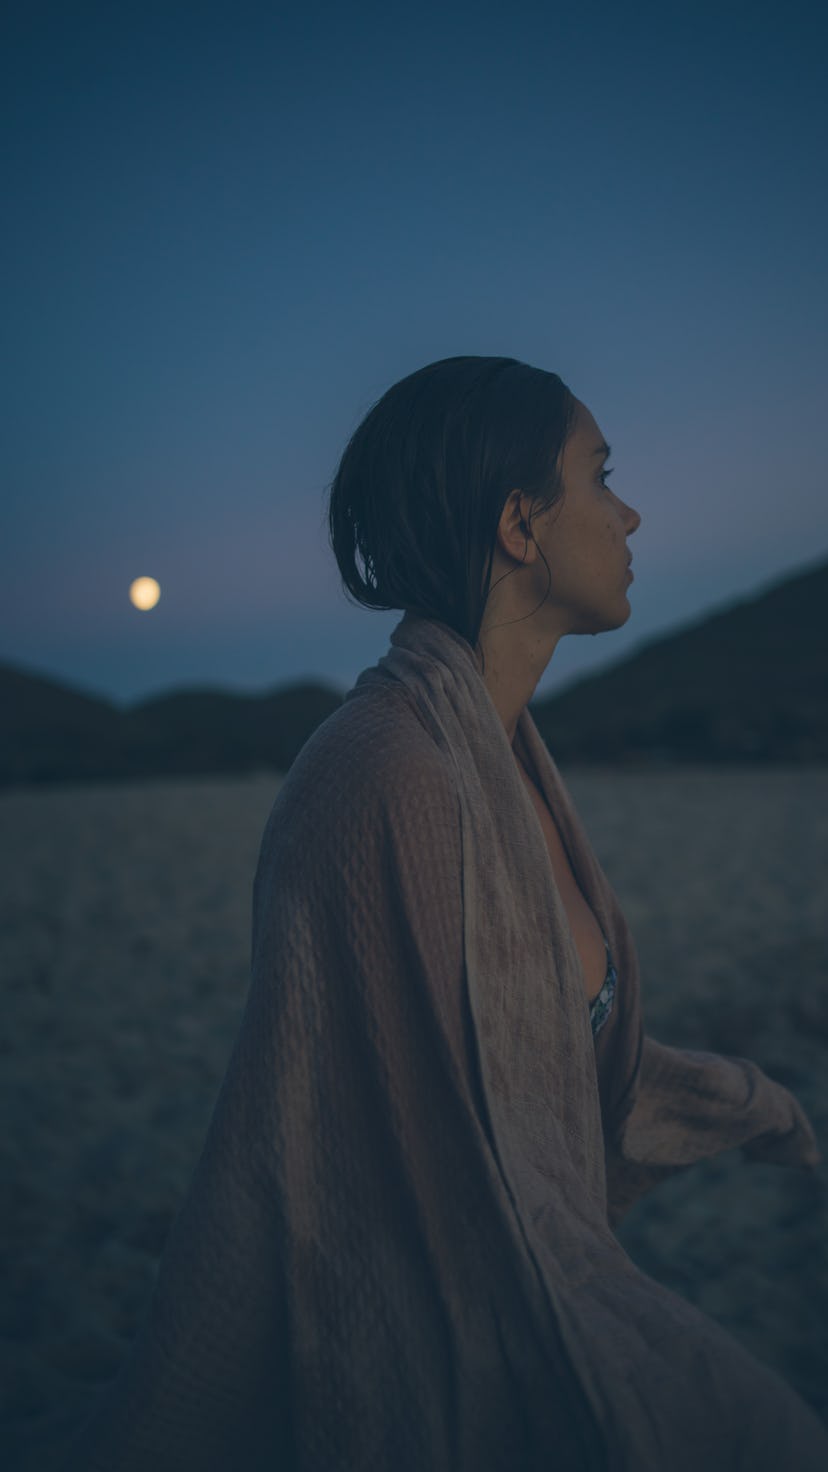 The January 2022 full moon arrives on Jan. 17 and moves into emotionally intuitive Cancer.